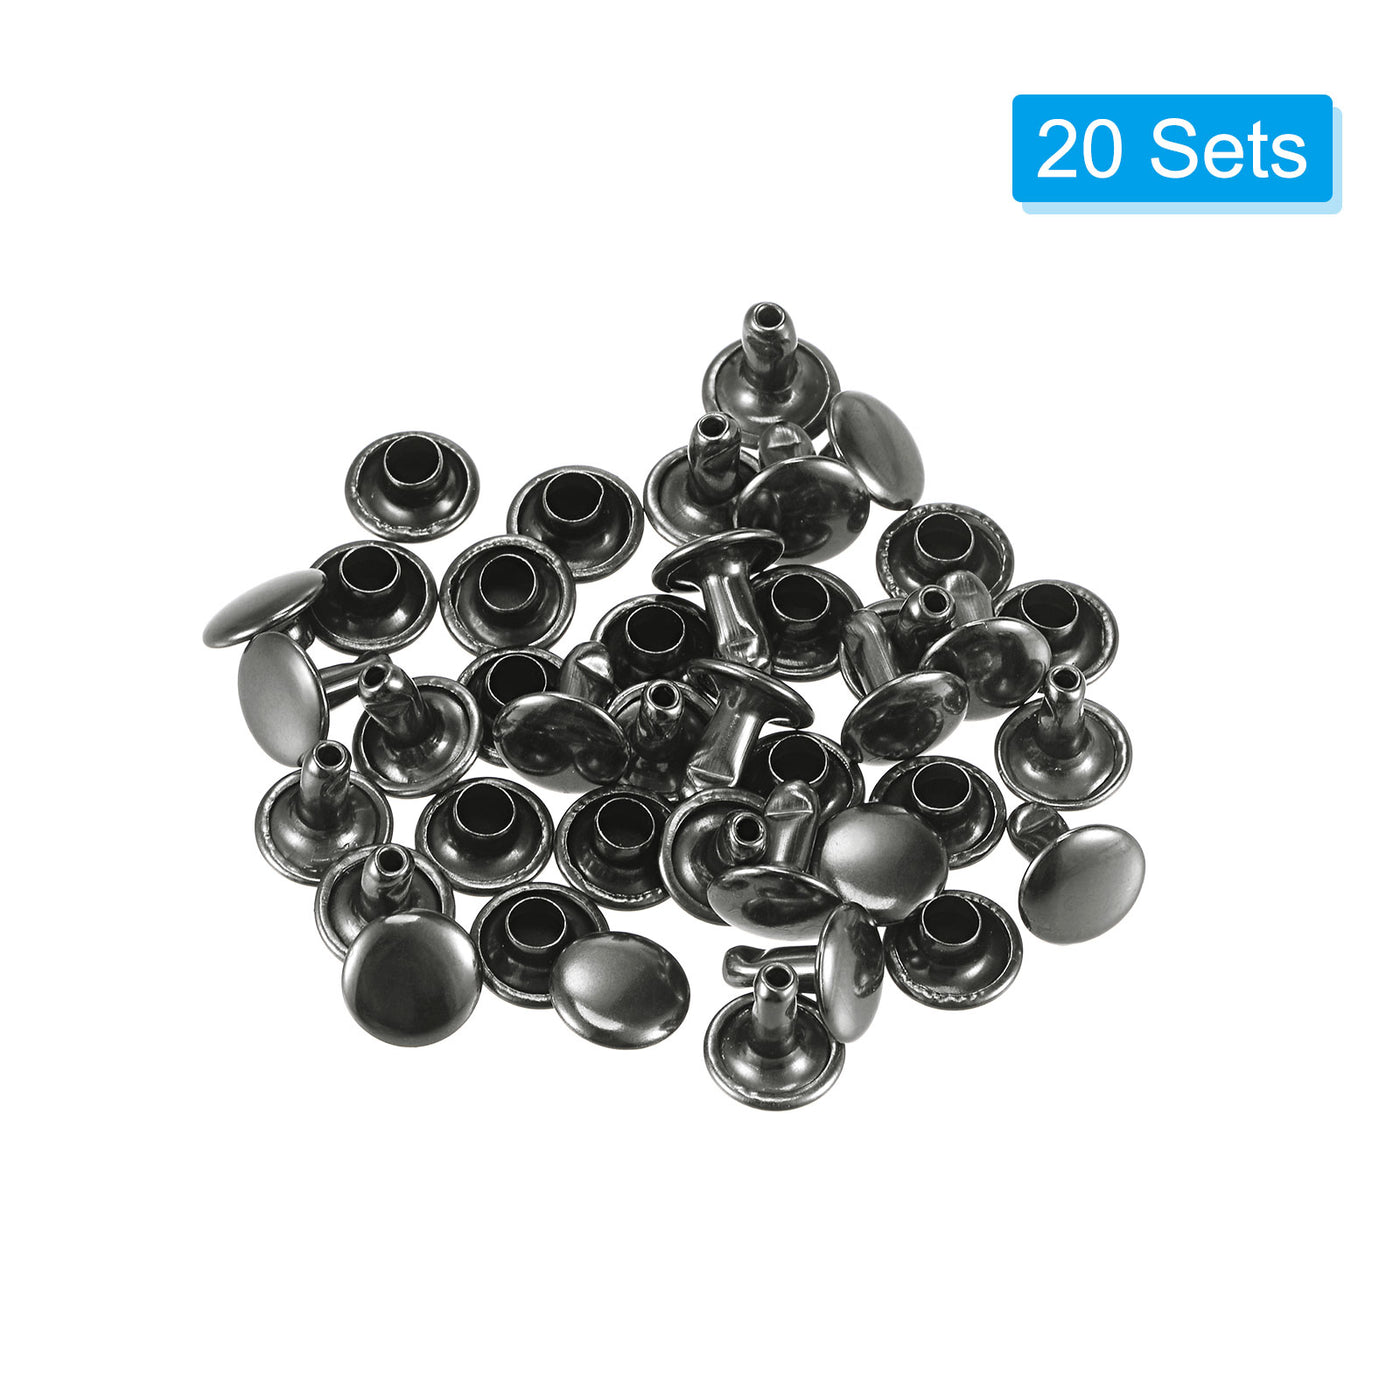 uxcell Uxcell 20 Sets Leather Rivets Dim Gray 8mm Double Cap Brass Rivet Leather Studs